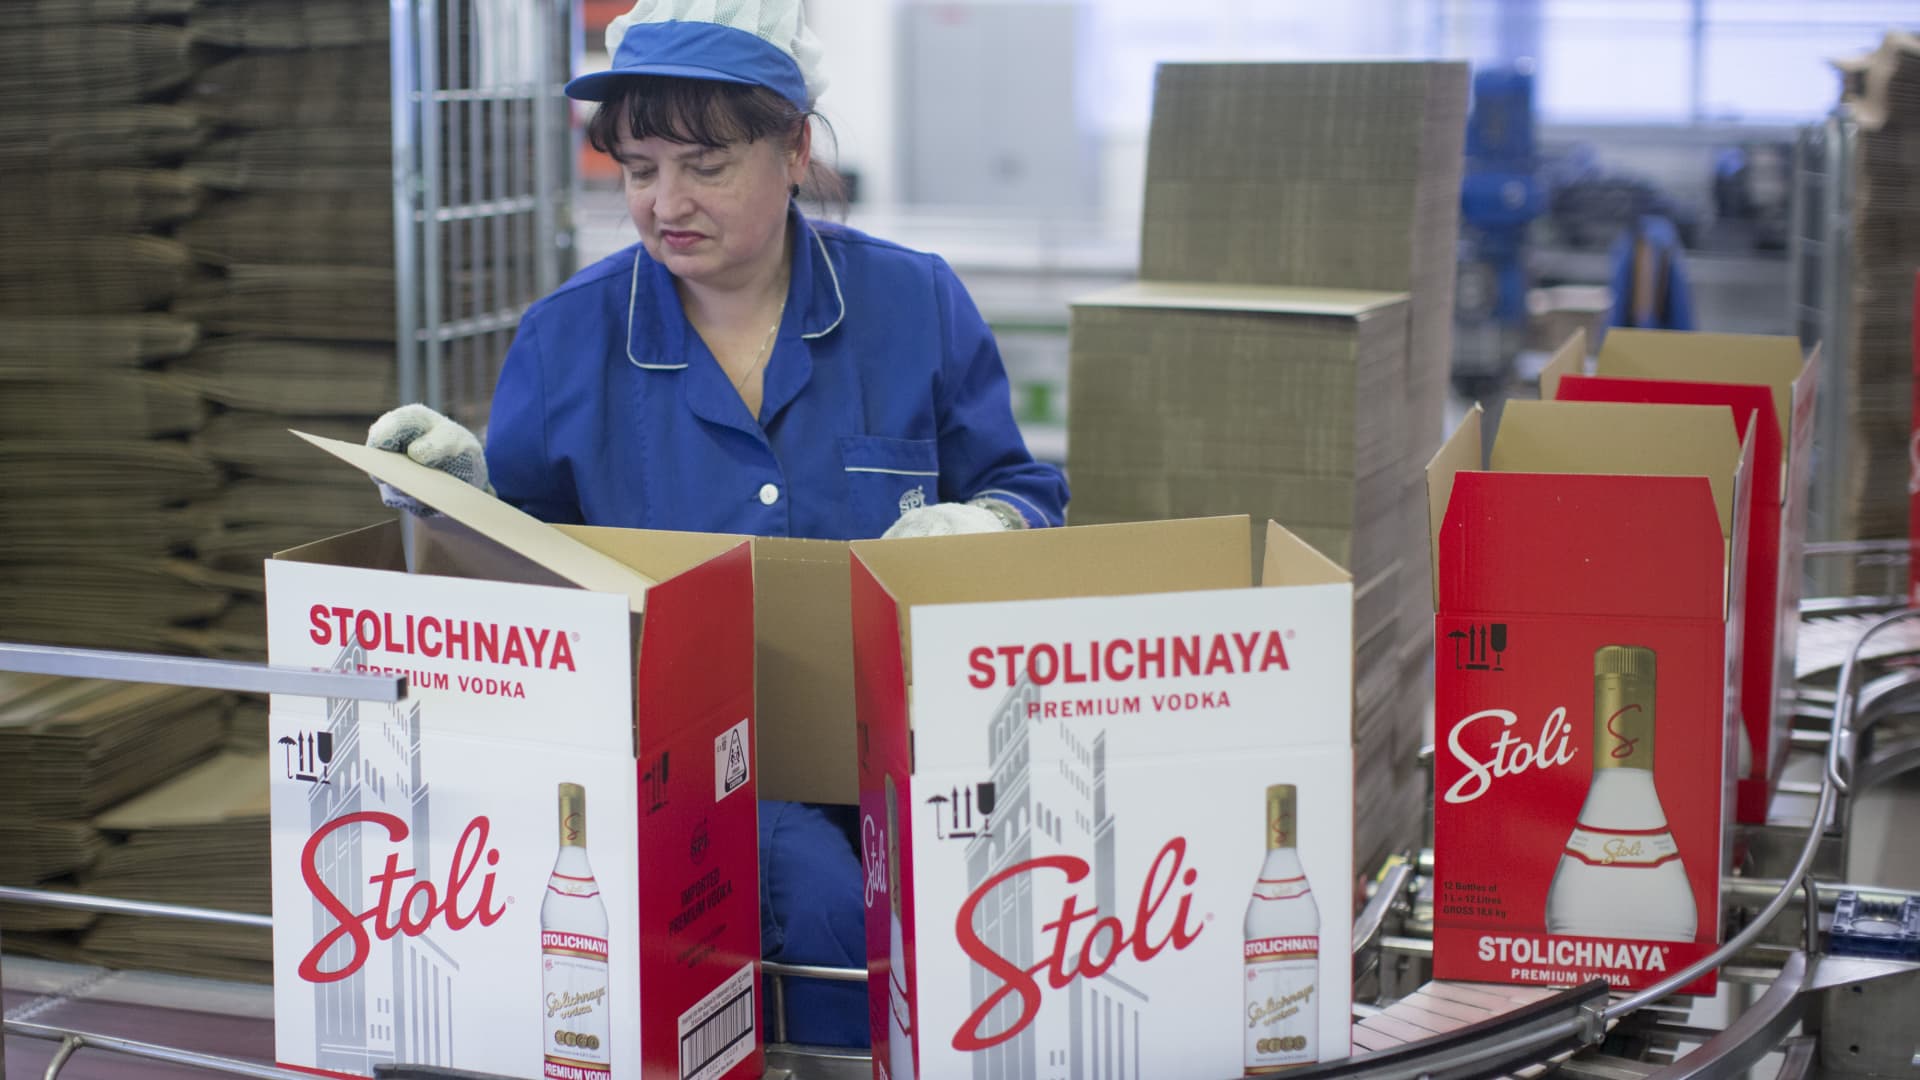 Workers prepare shipping boxes for Stolichnaya vodka, operated by the SPI Group, on the production line in Riga, Latvia.